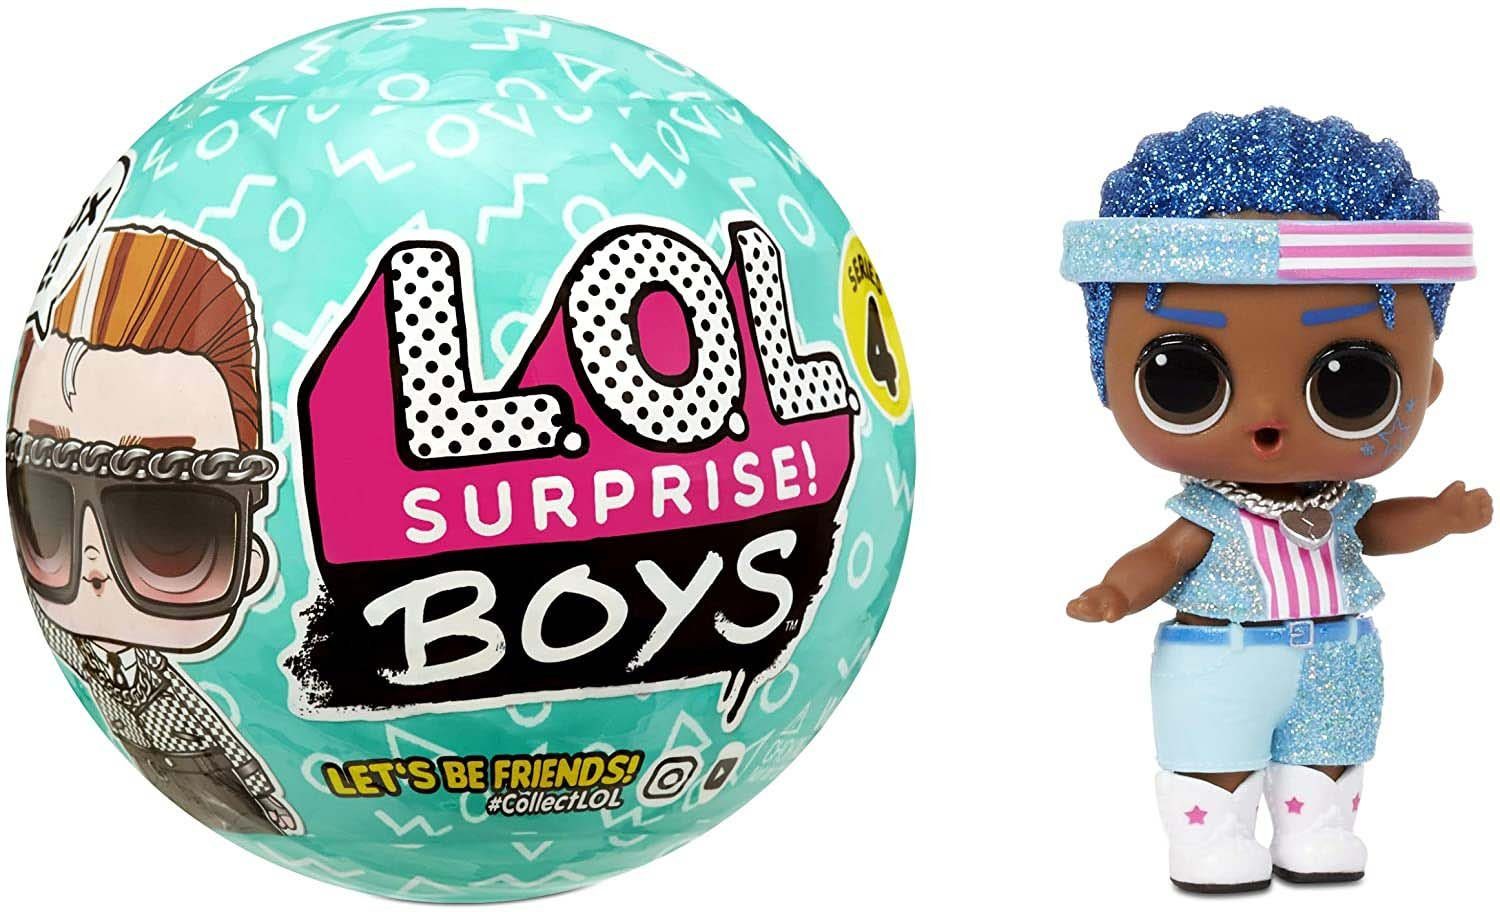 MGA ENTERTAINMENT Anziehpuppe MGA Entertainment 572695EUC - L.O.L. Surprise Boys Asst in PDQ